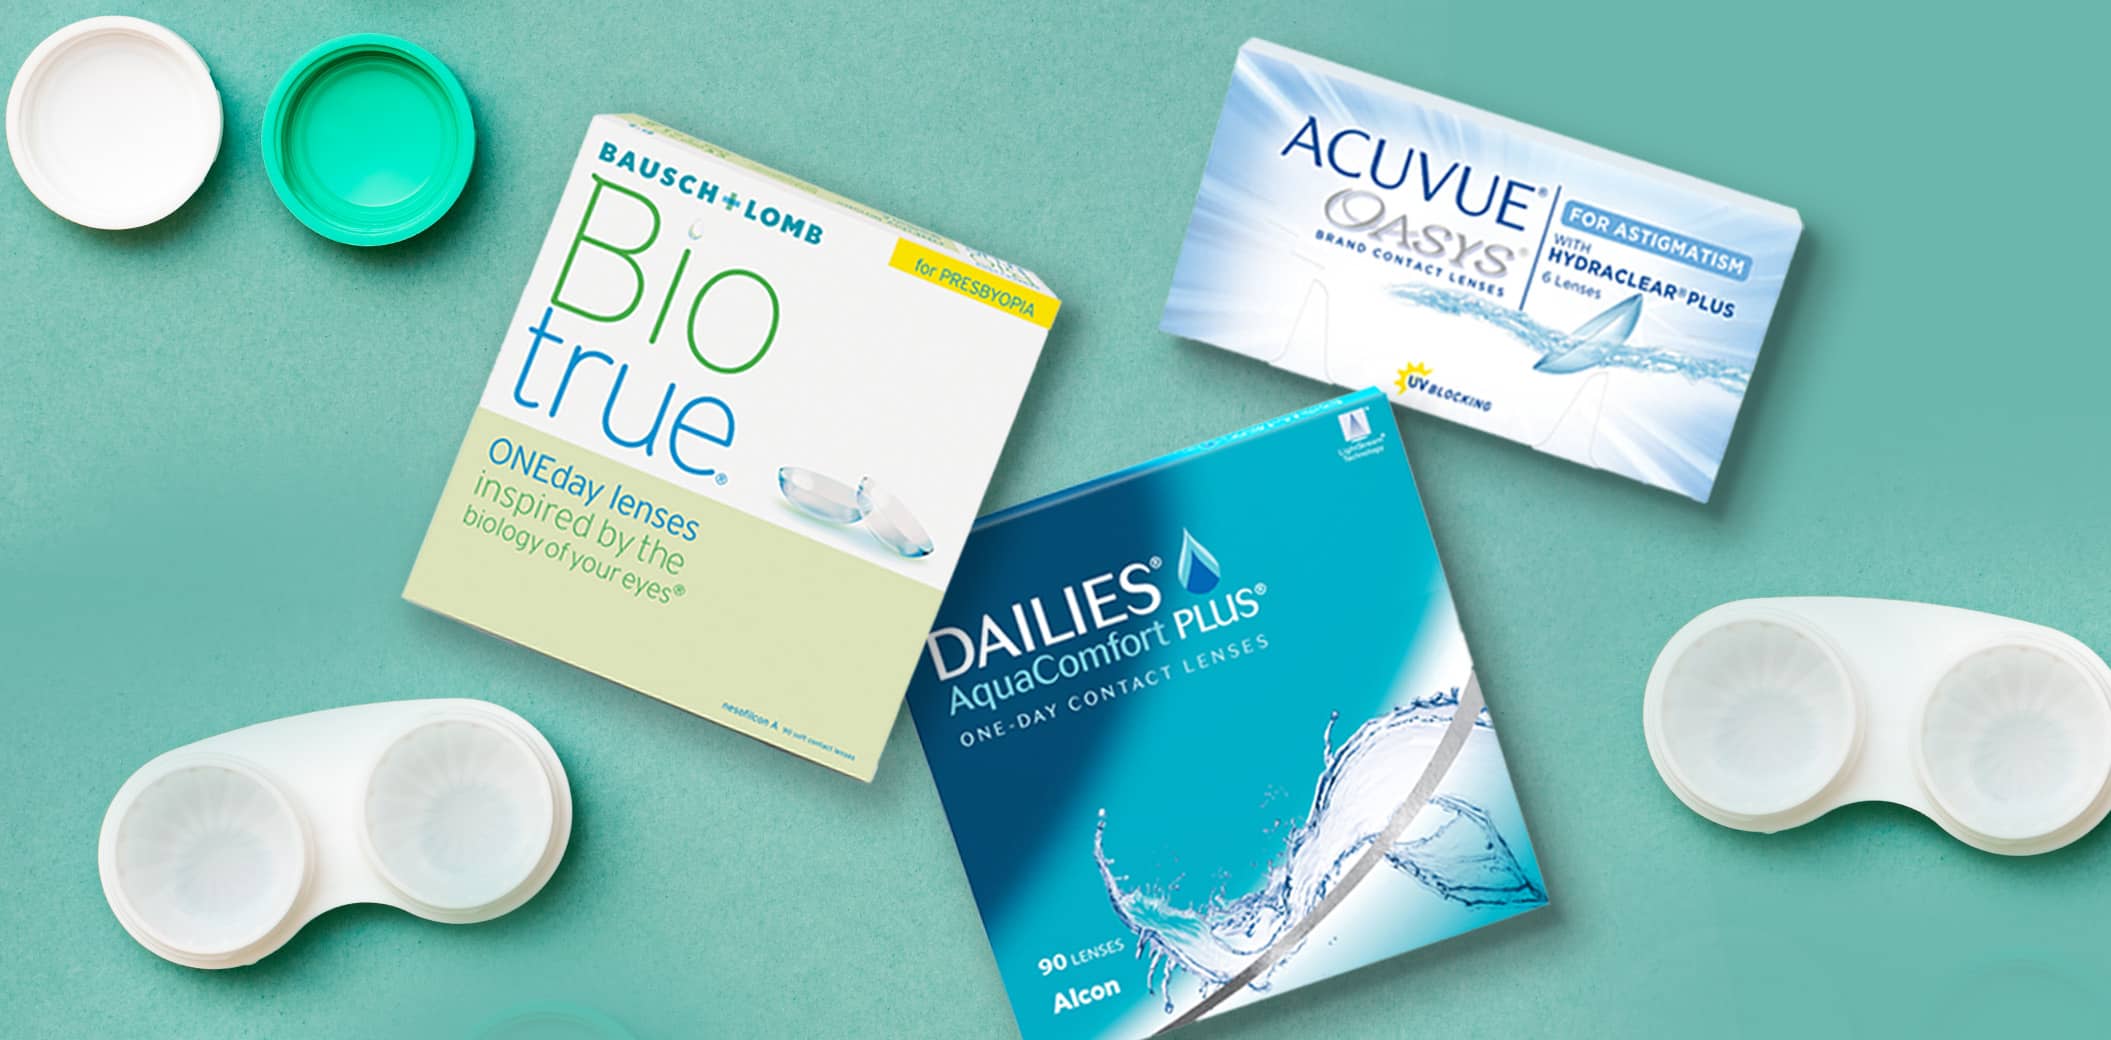 Biotrue, Dailies and Acuvue contact lenses